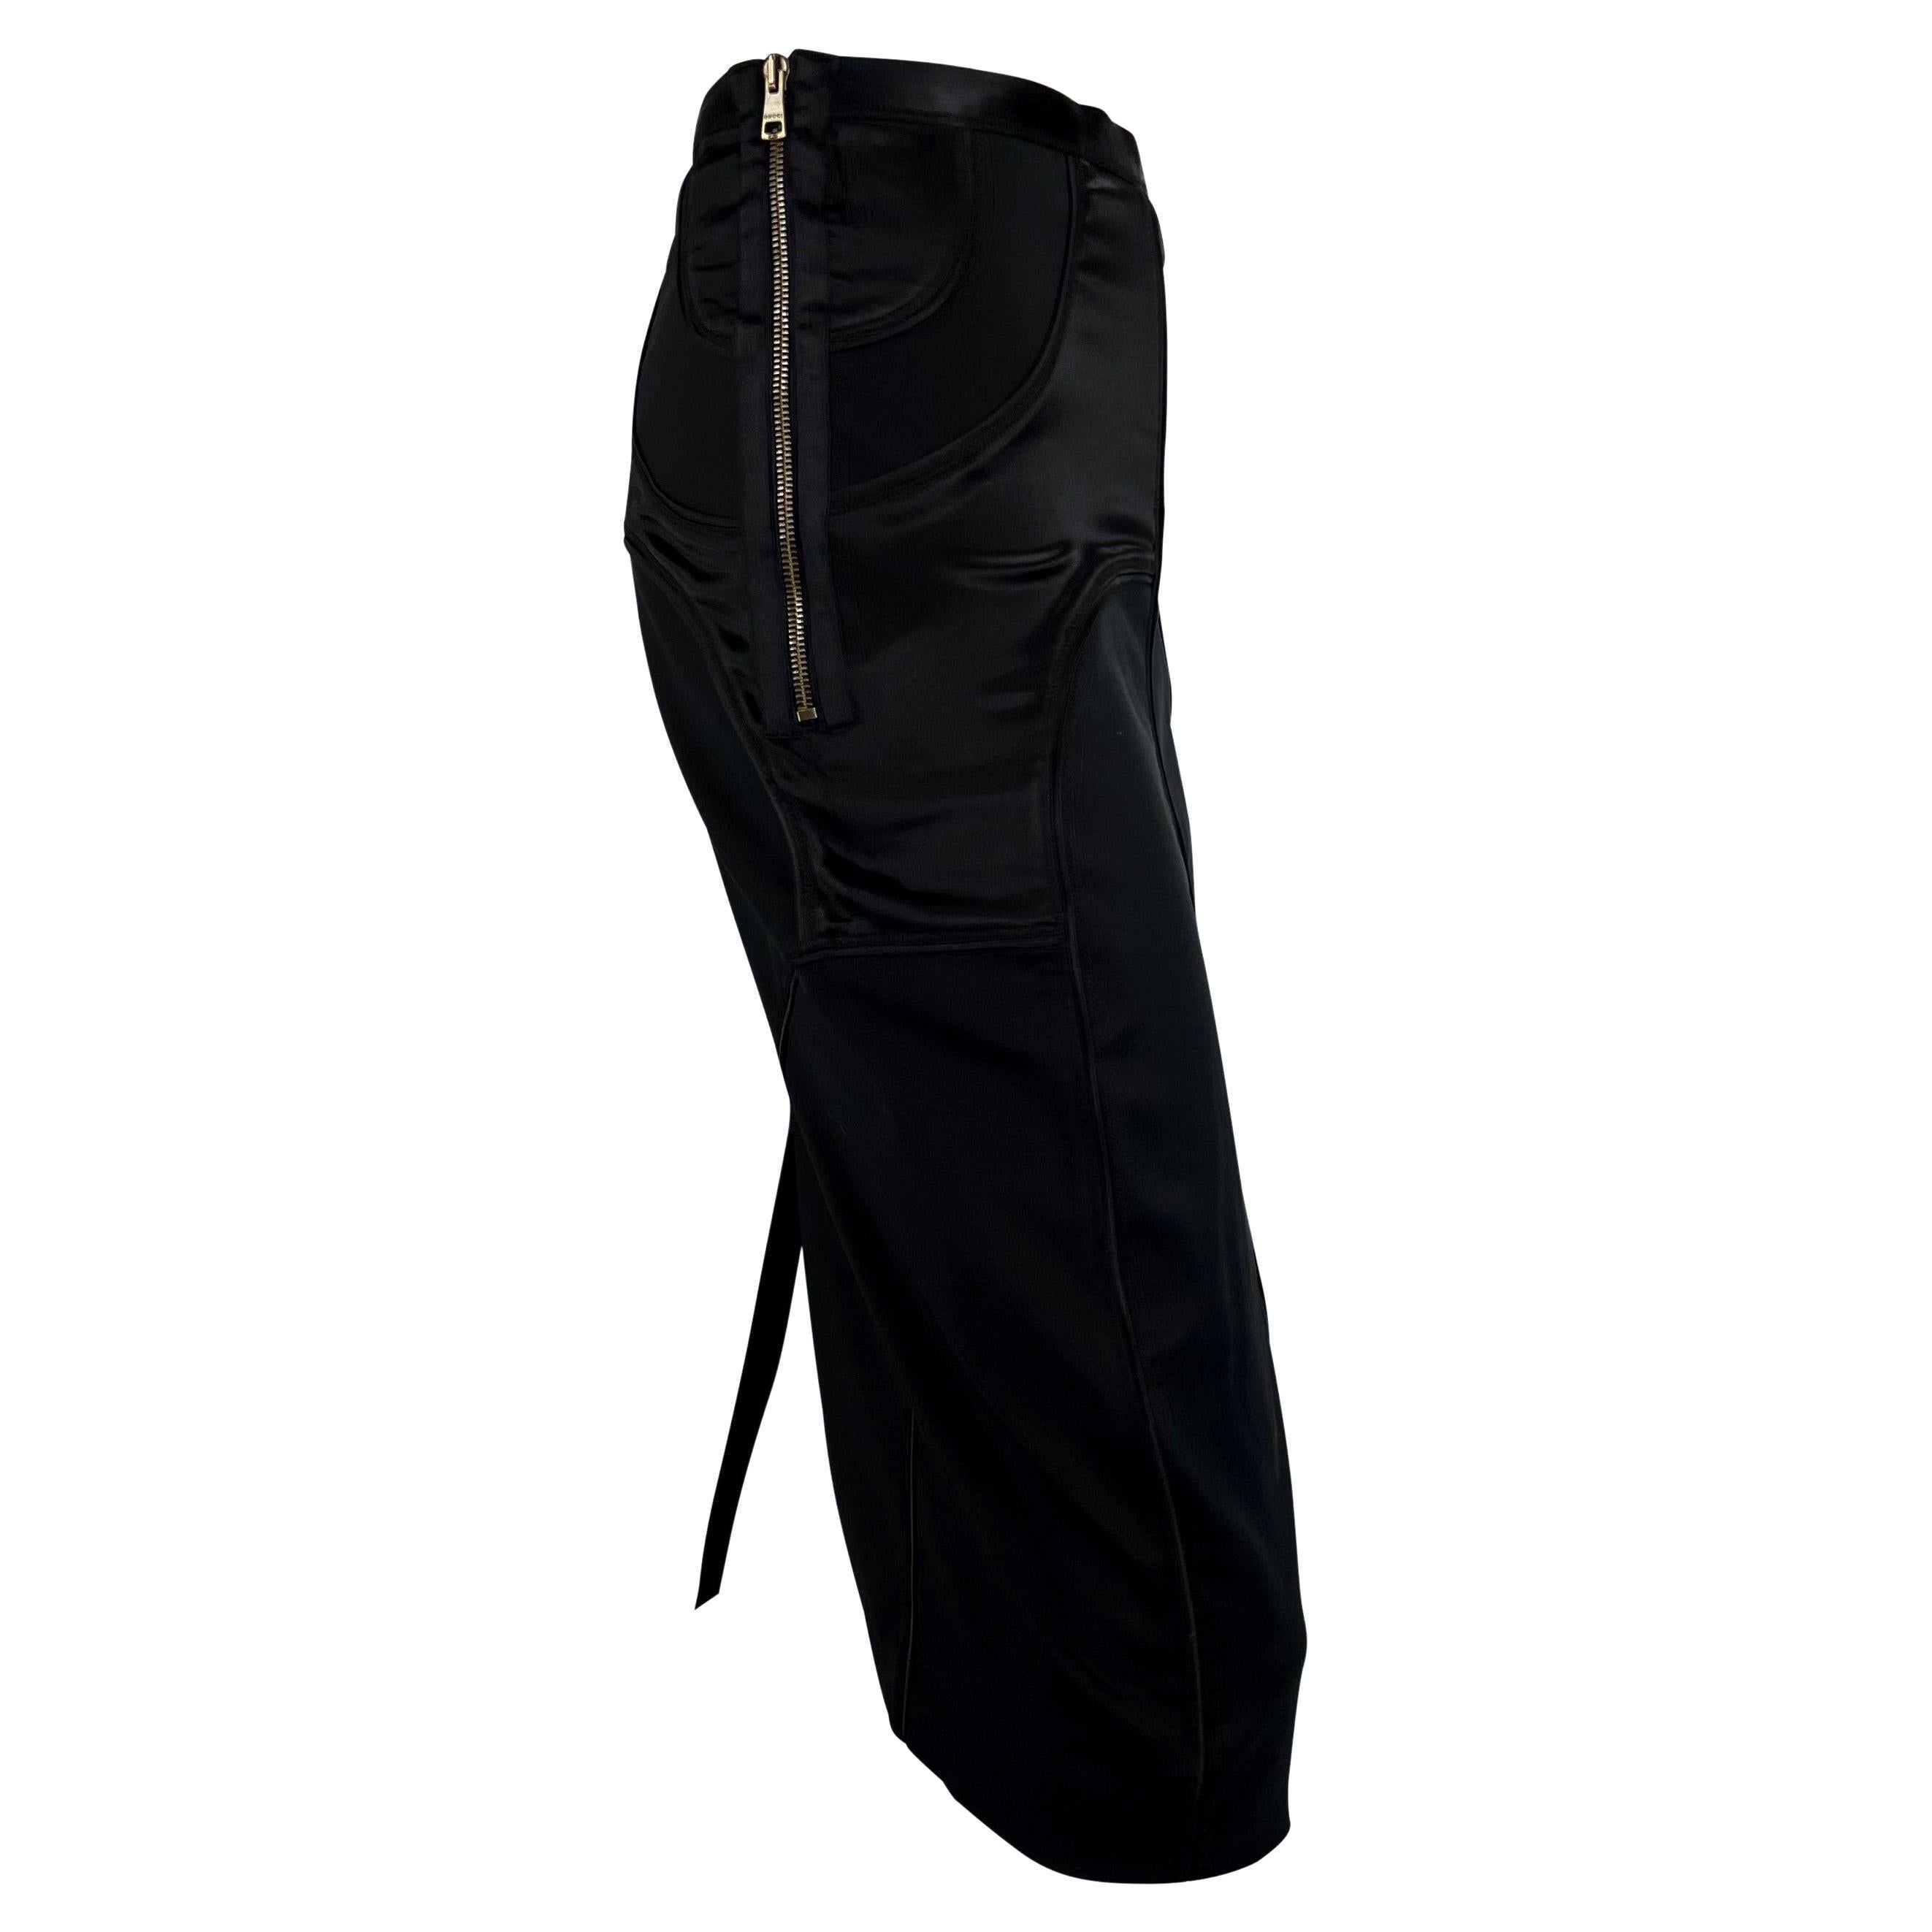 F/W 2003 Gucci by Tom Ford Black Satin Panel Zip Stretch Skirt For Sale 2